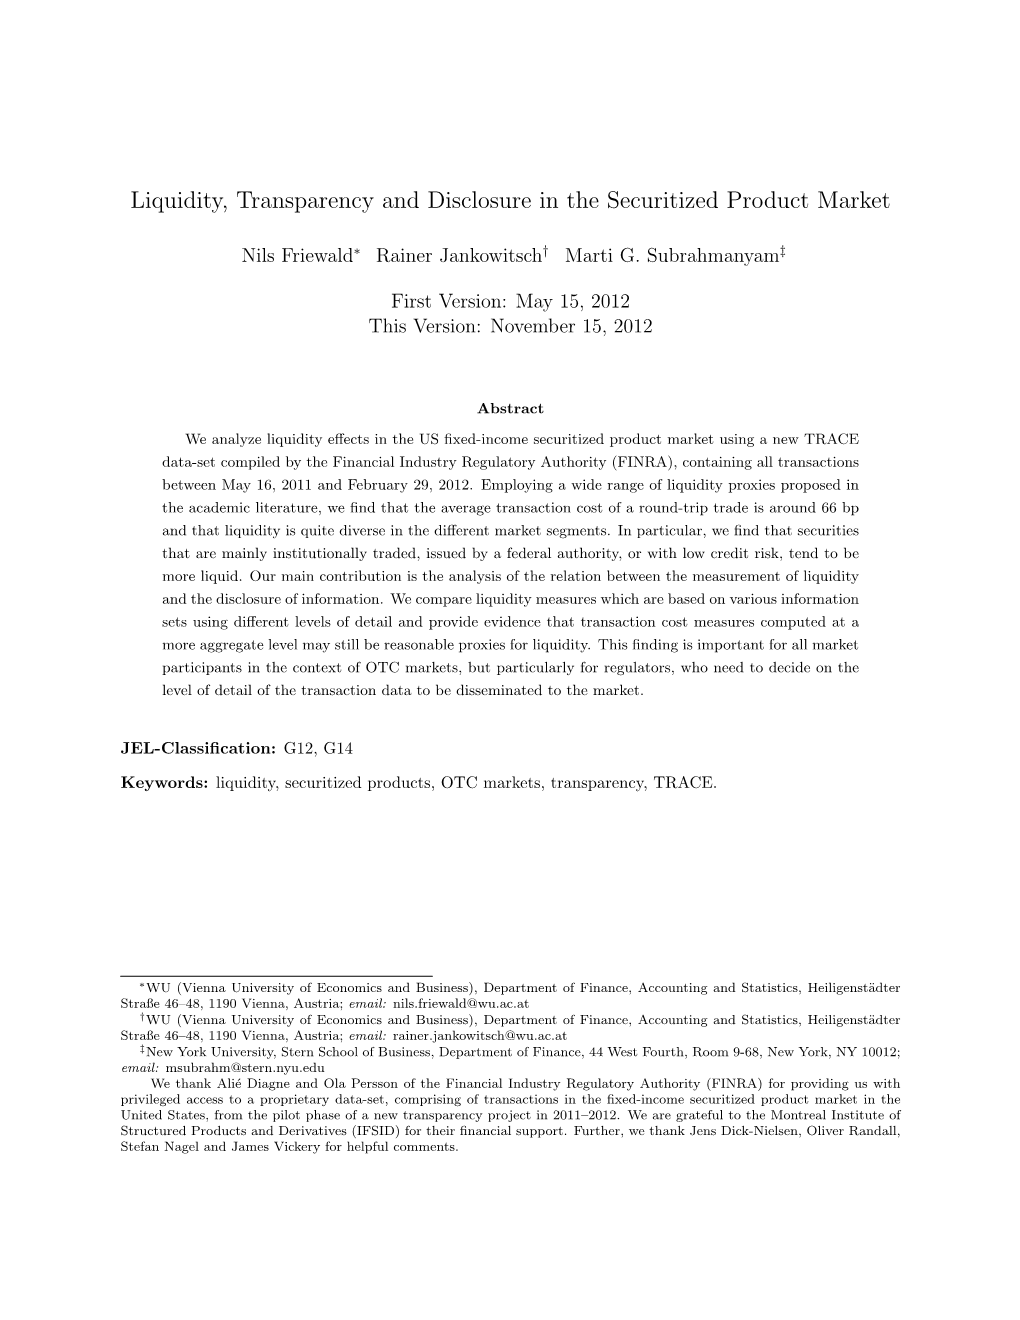 Liquidity, Transparency and Disclosure in the Securitized Product Market